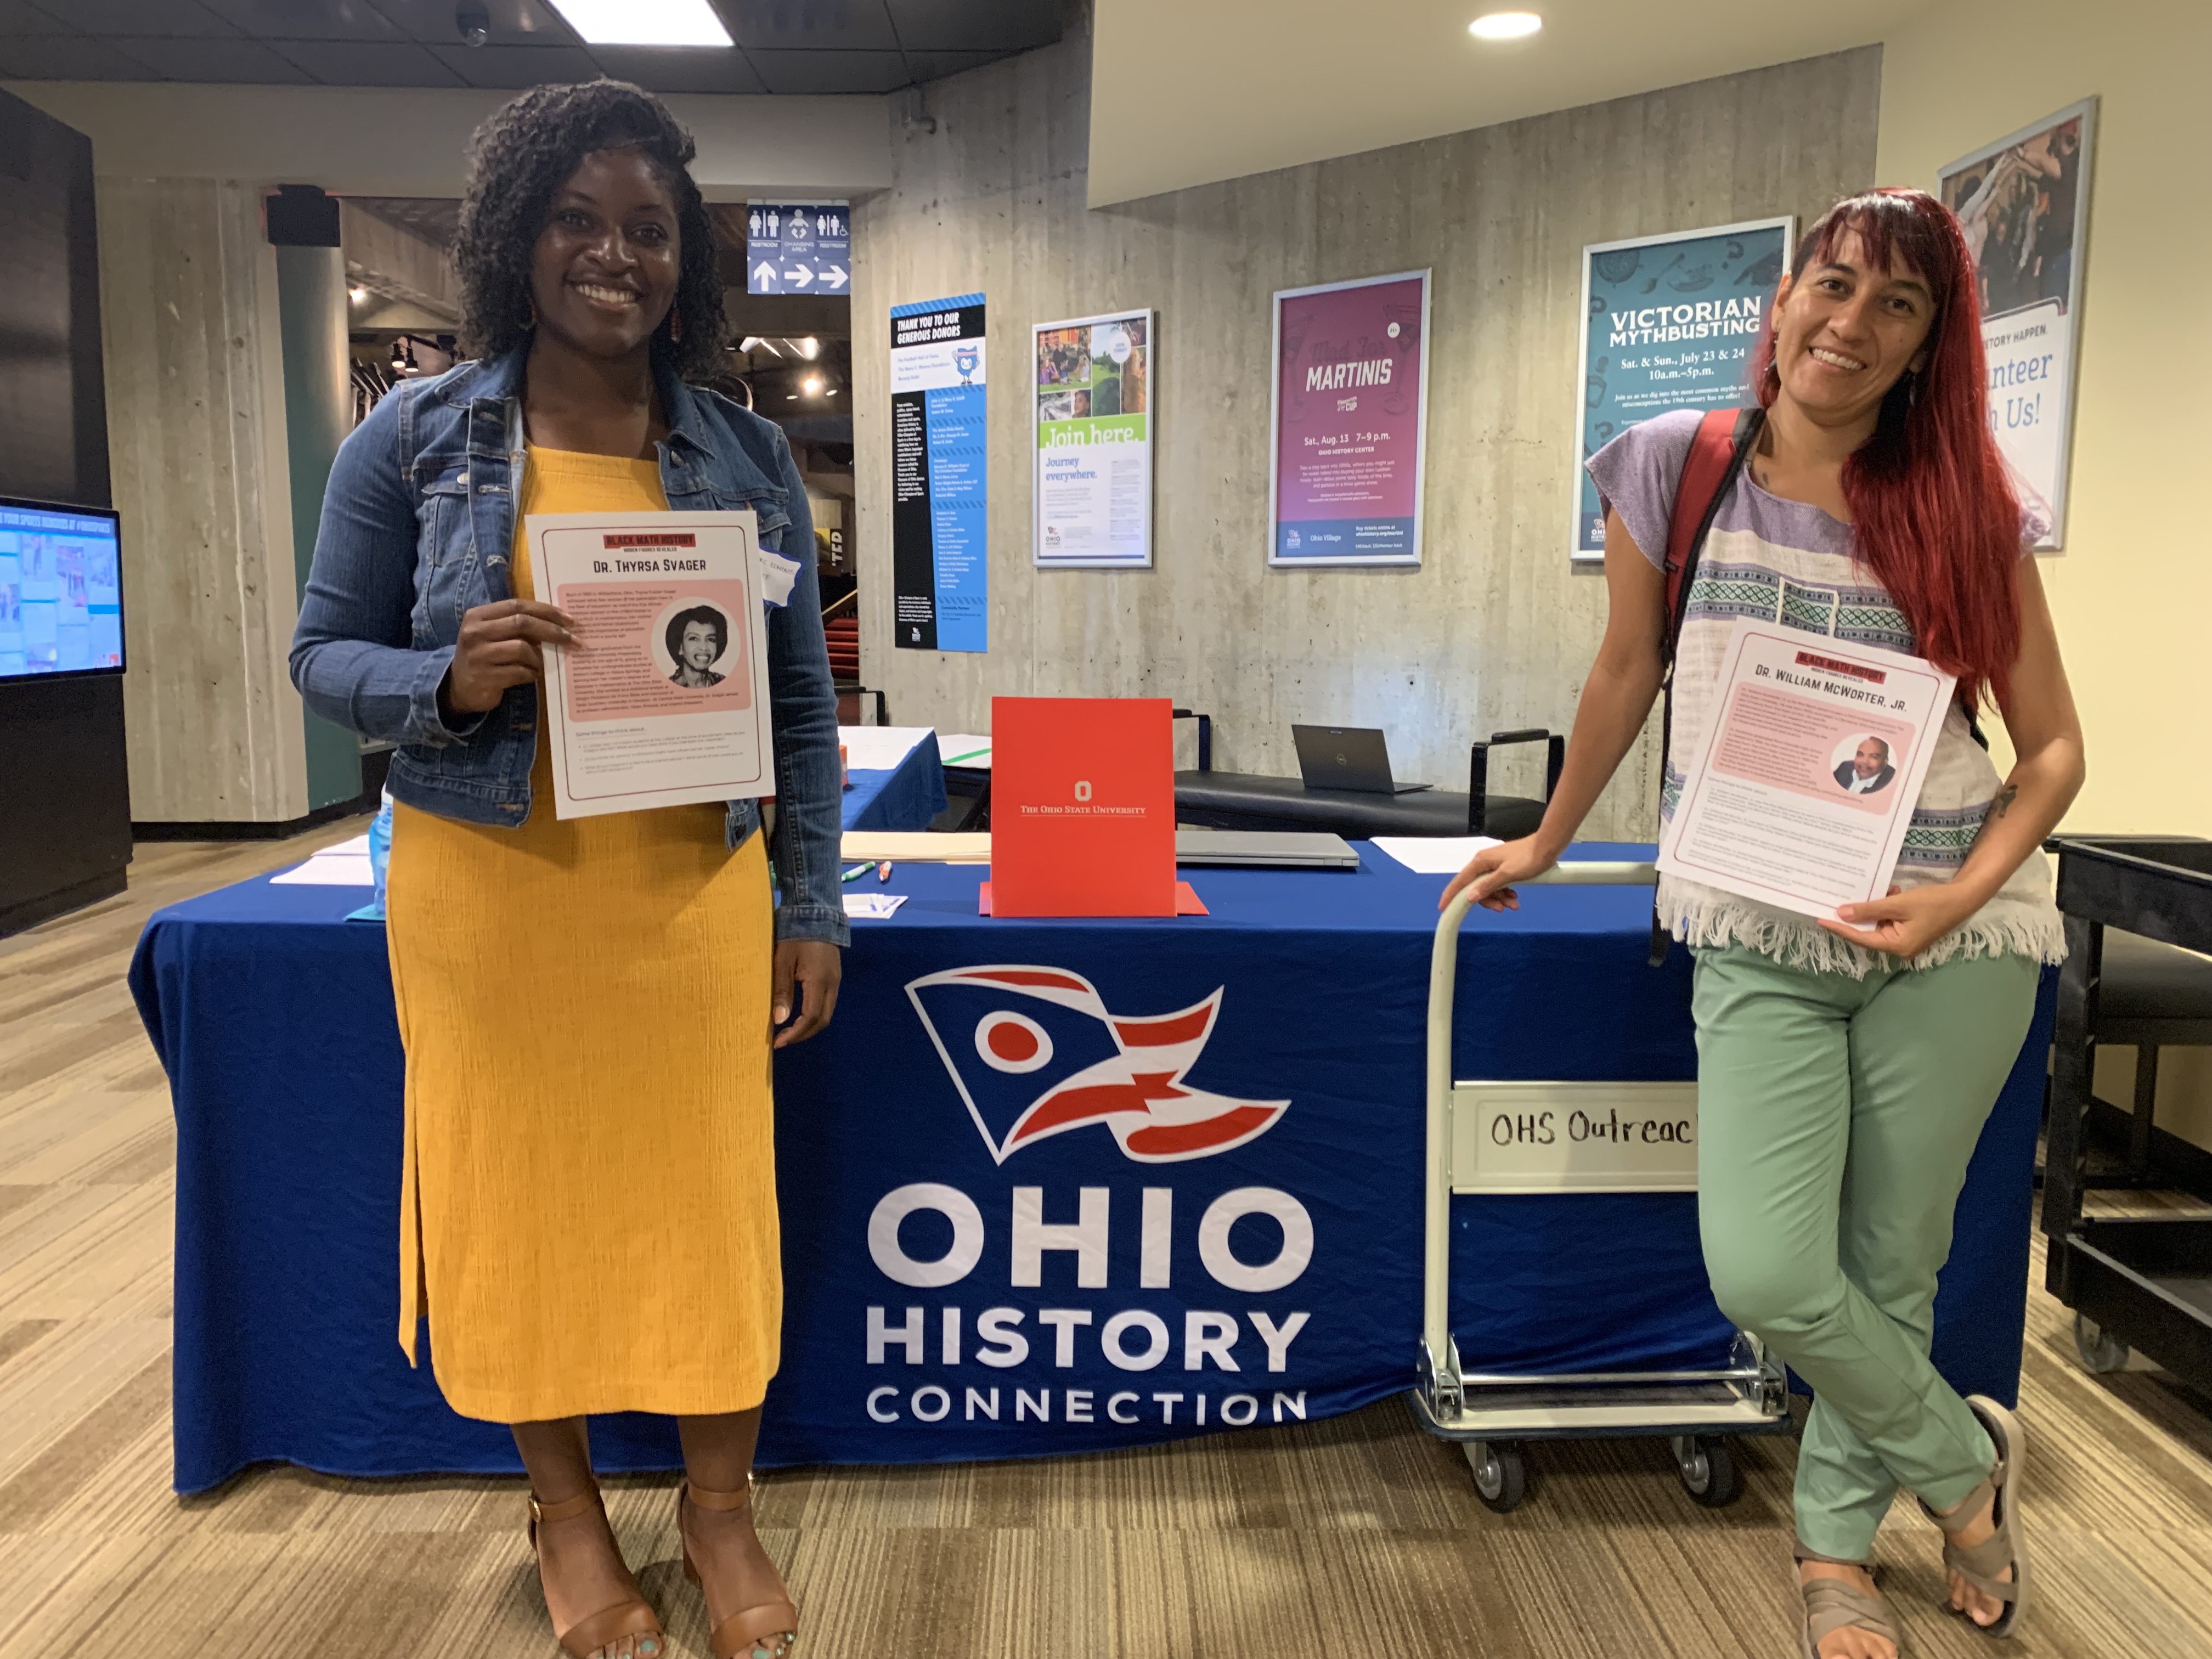 Image of Ranthony Edmonds and Monica Delgado Carillo at Ohio History Connection after a Professional Development Workshop for Central Ohio Teachers